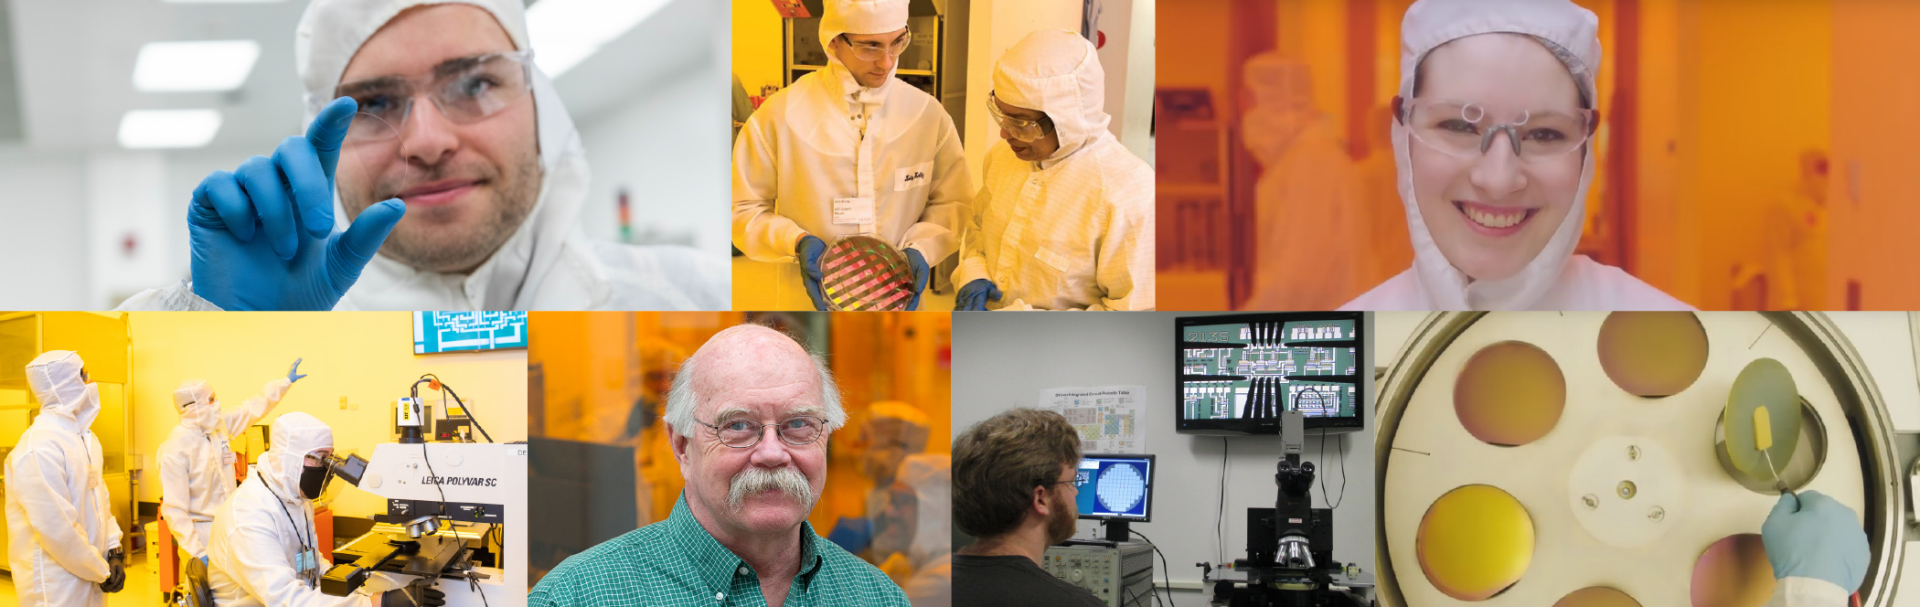 A collage of photos representing RIT's microelectronic engineering program. People working in the Semiconductor Microsystems Fabrication Lab and images of computer chip wafers.